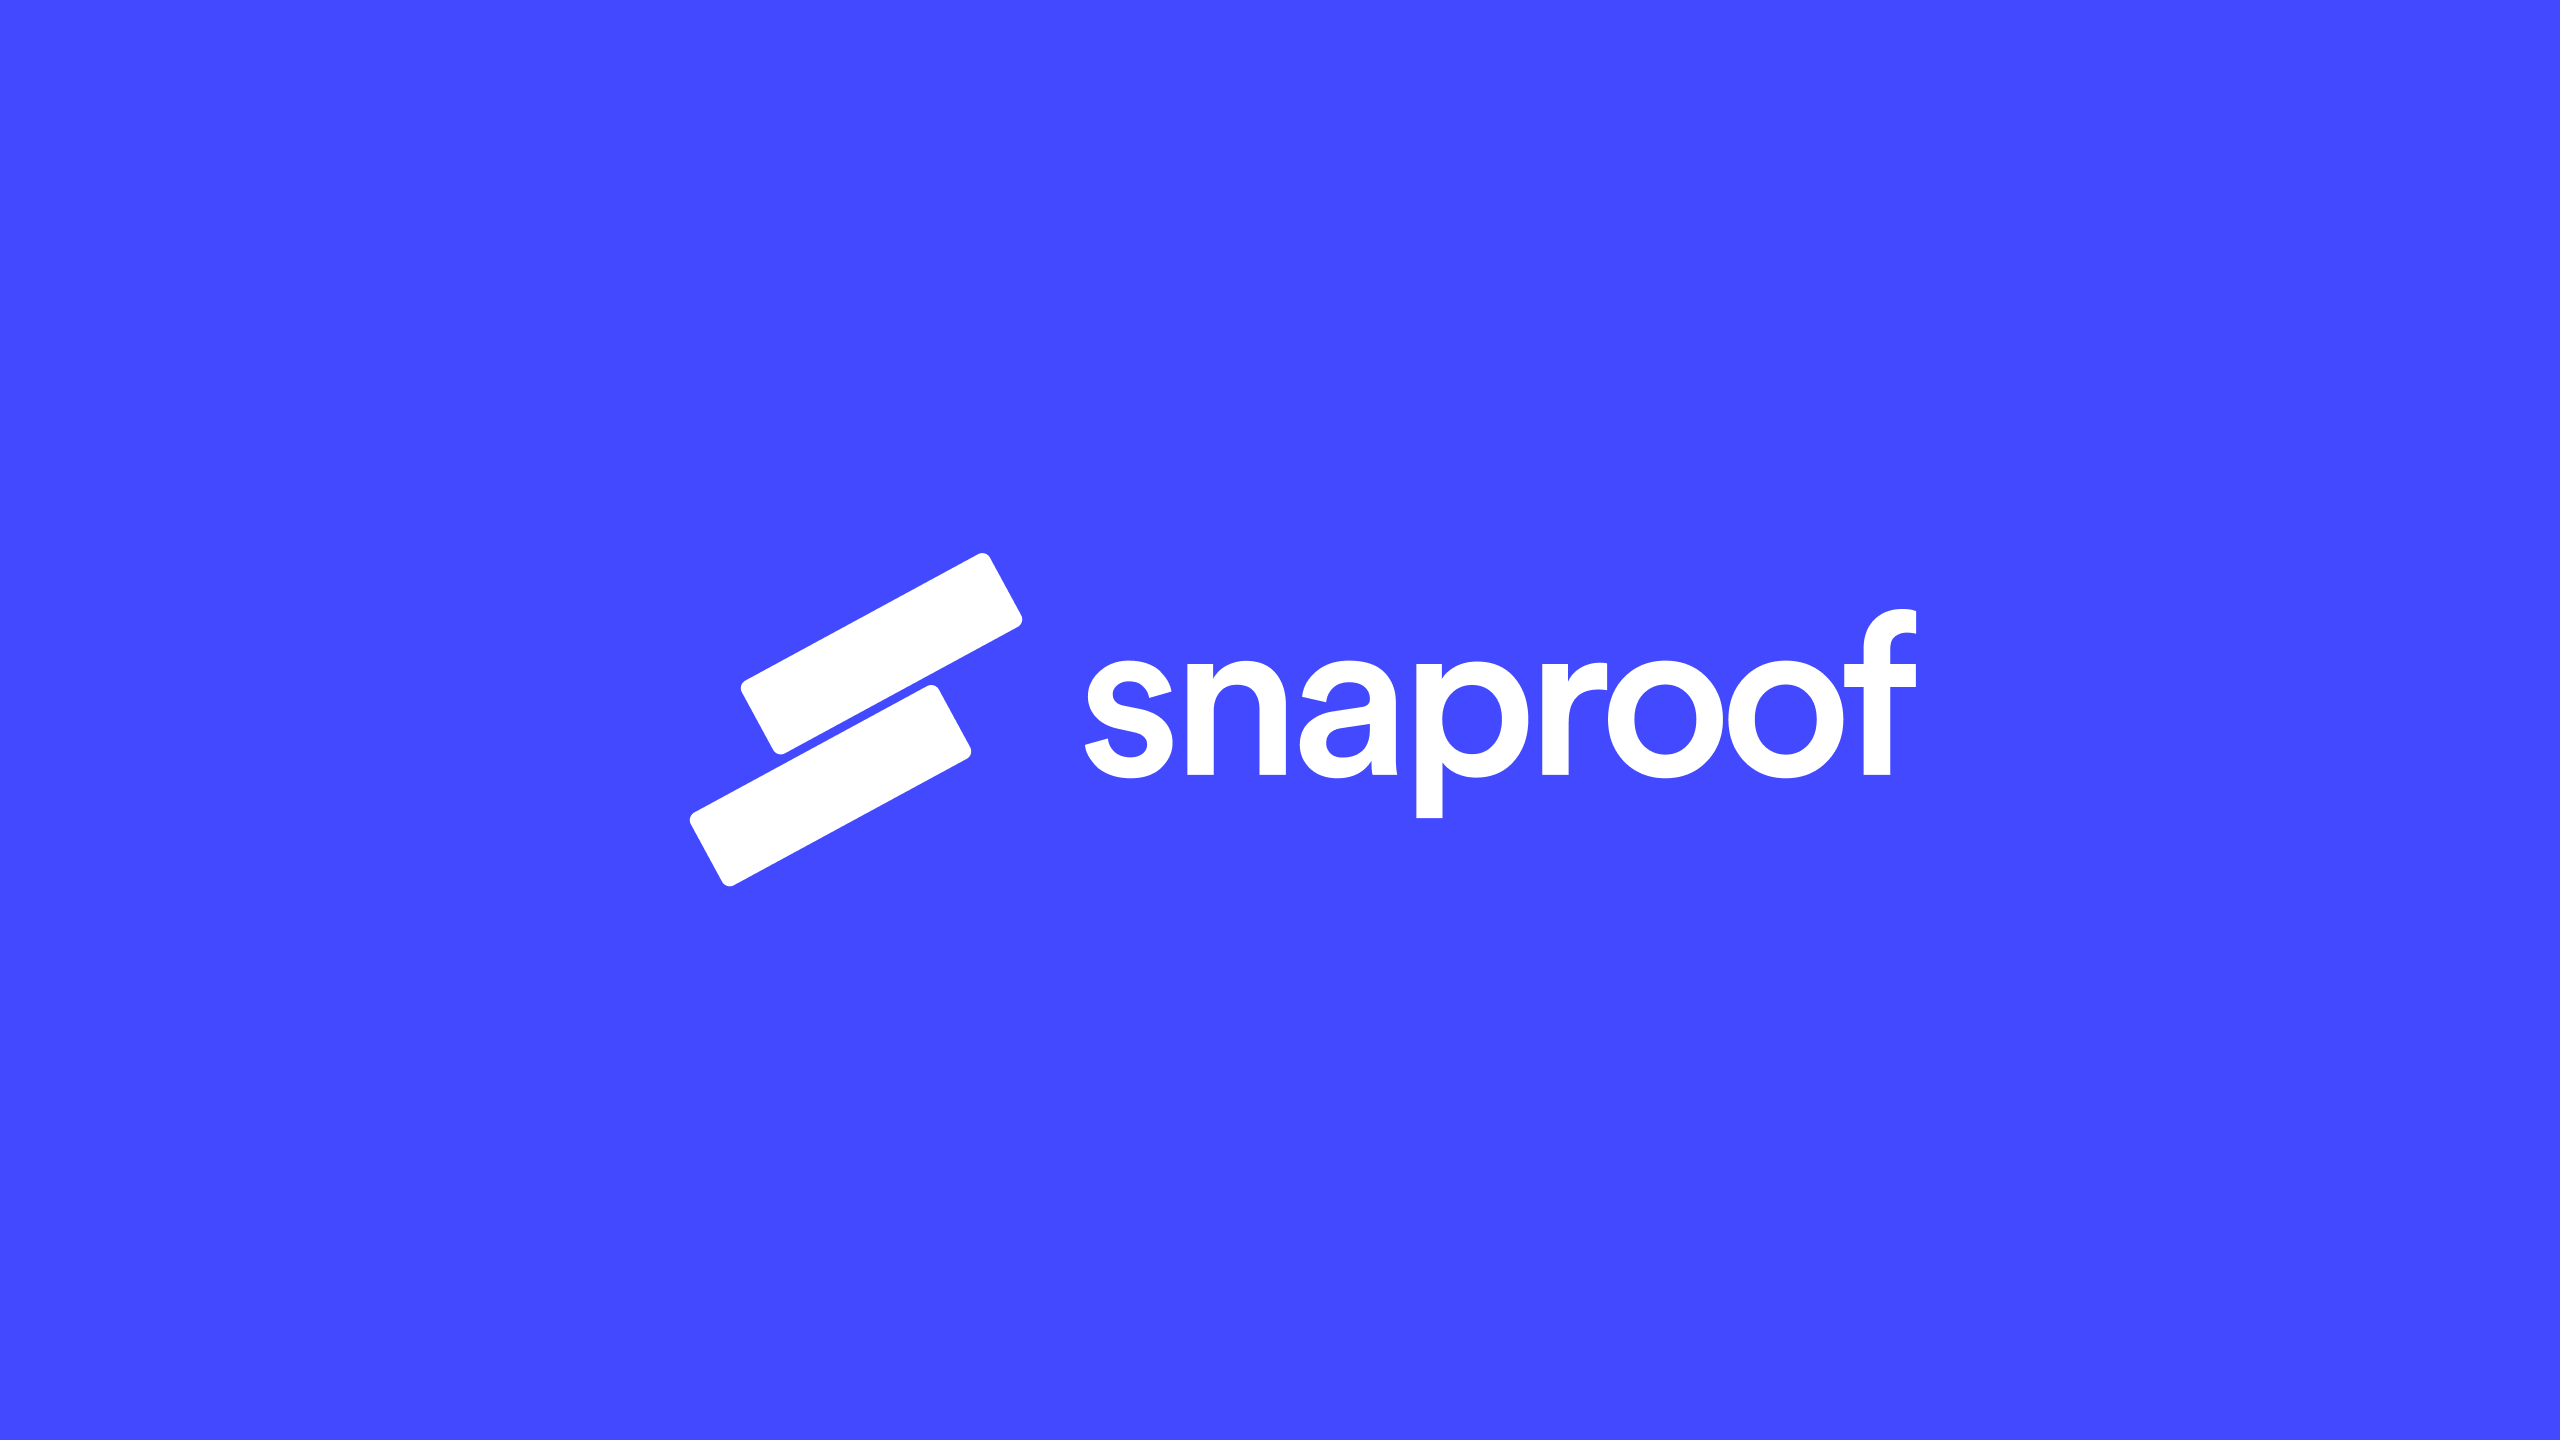 SNAPROOF